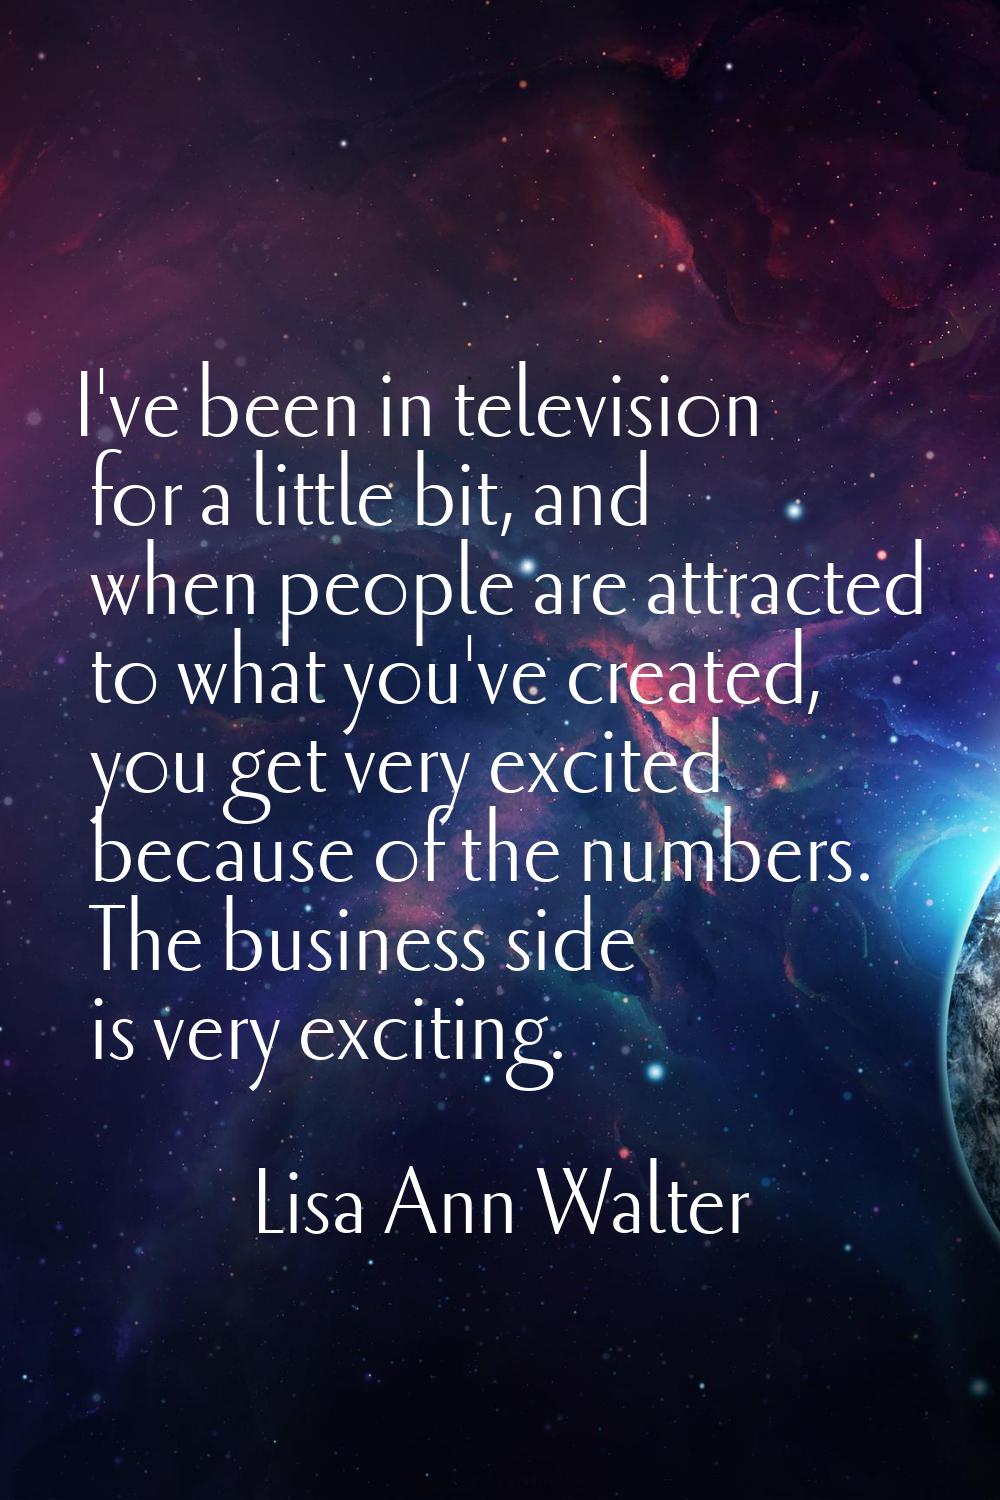 I've been in television for a little bit, and when people are attracted to what you've created, you